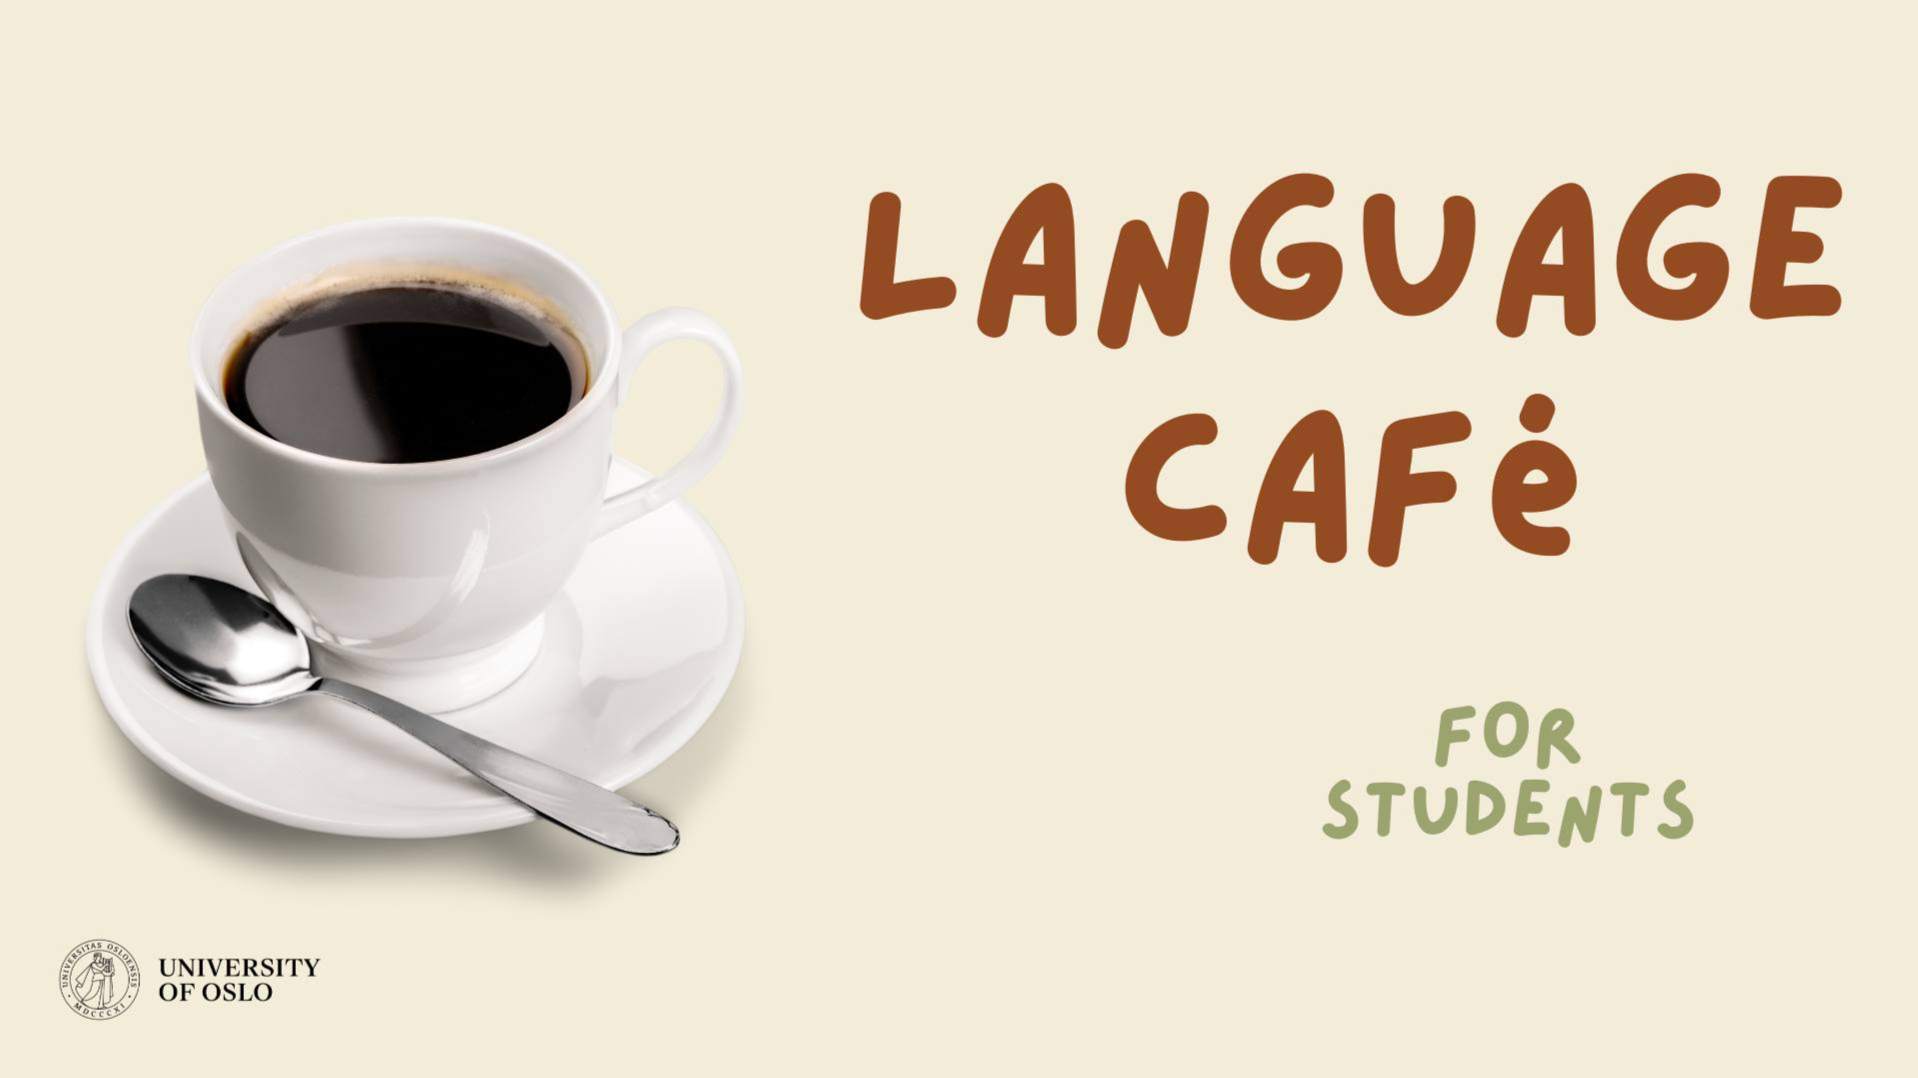 Language cafe for students